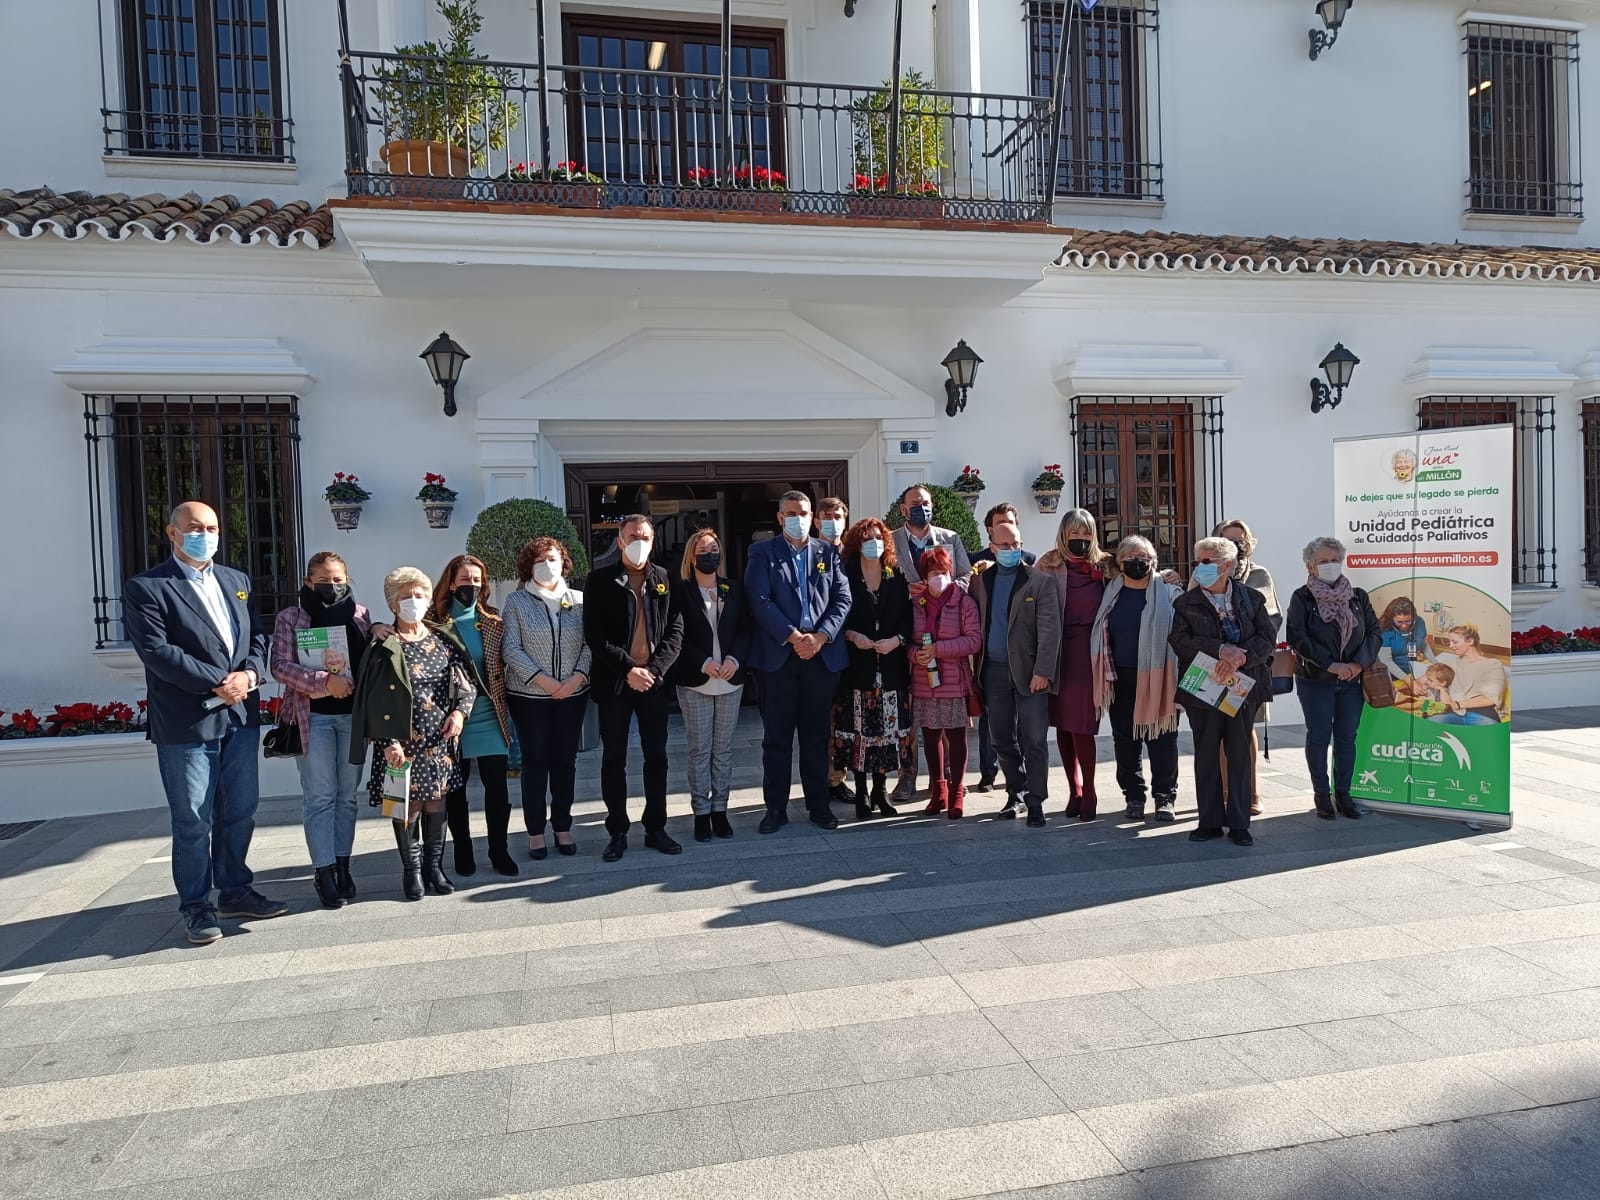 Presentation of “Joan Hunt, one in a million” Campaign in Mijas